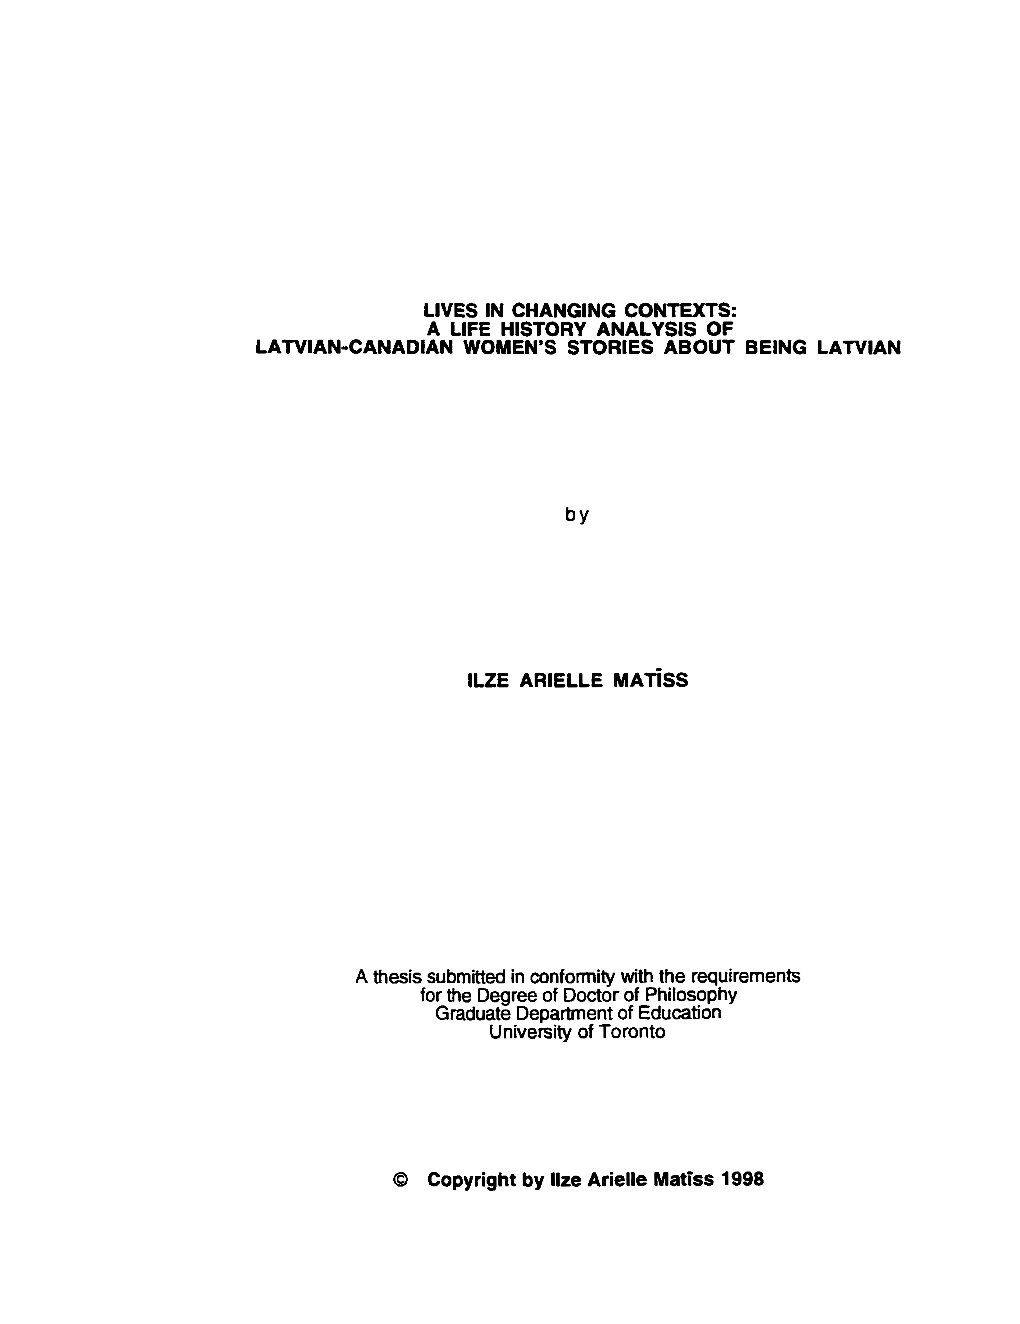 A Thesis Submitted in Conformity with the Requirements for the Degree of Doctor of Philosophy Graduate Department of Education University of Toronto